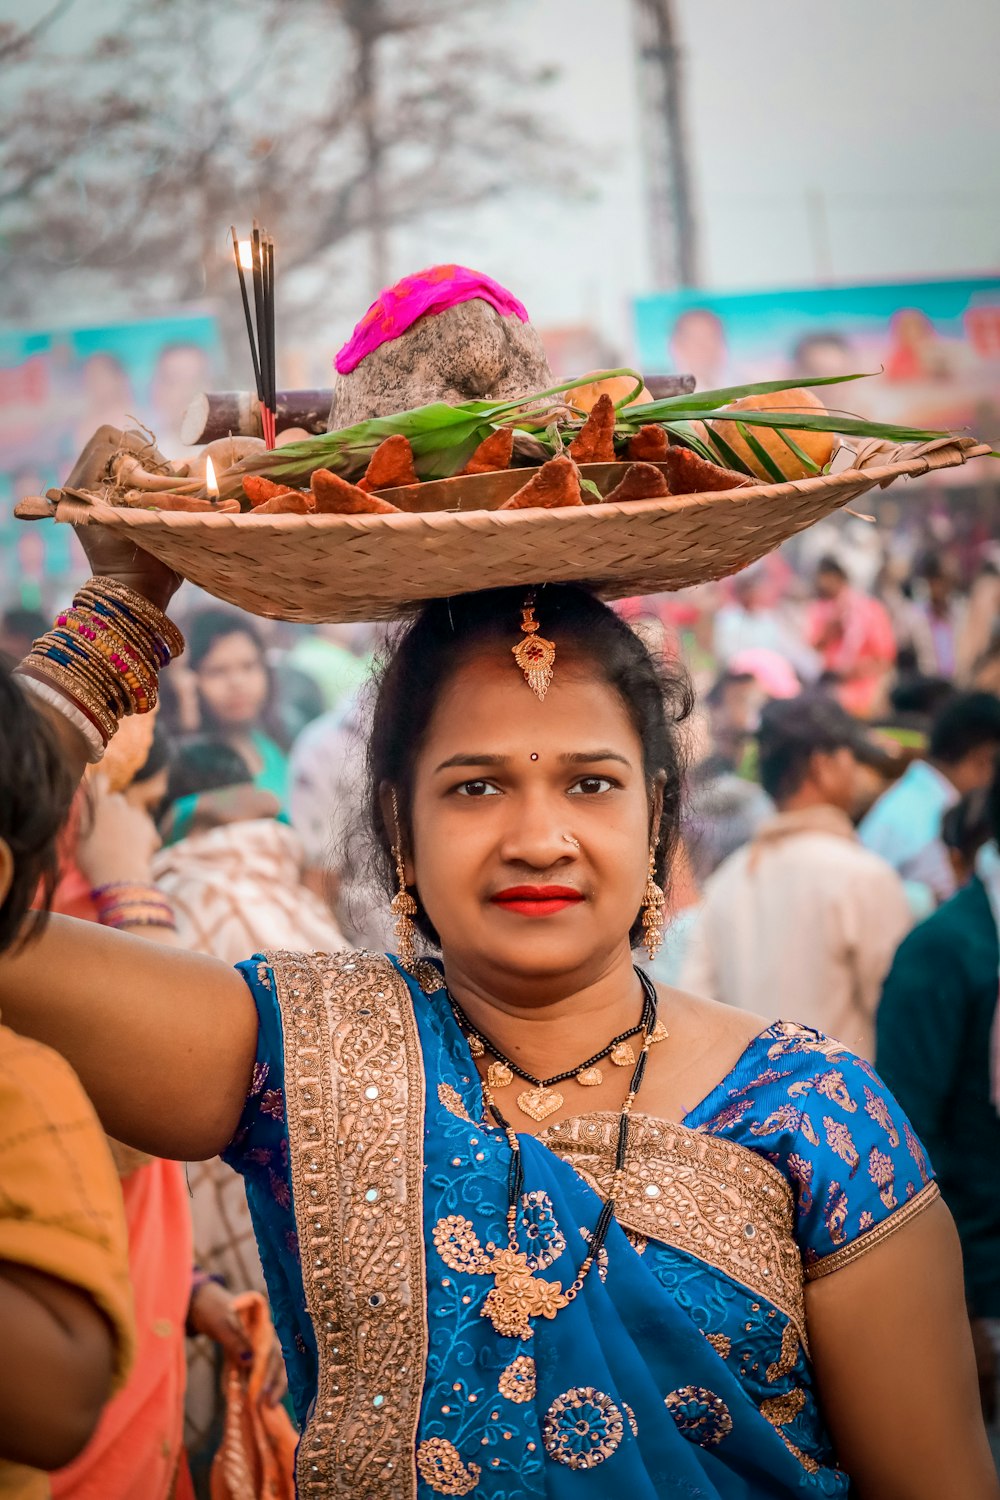 a woman carrying a tray of food on her head